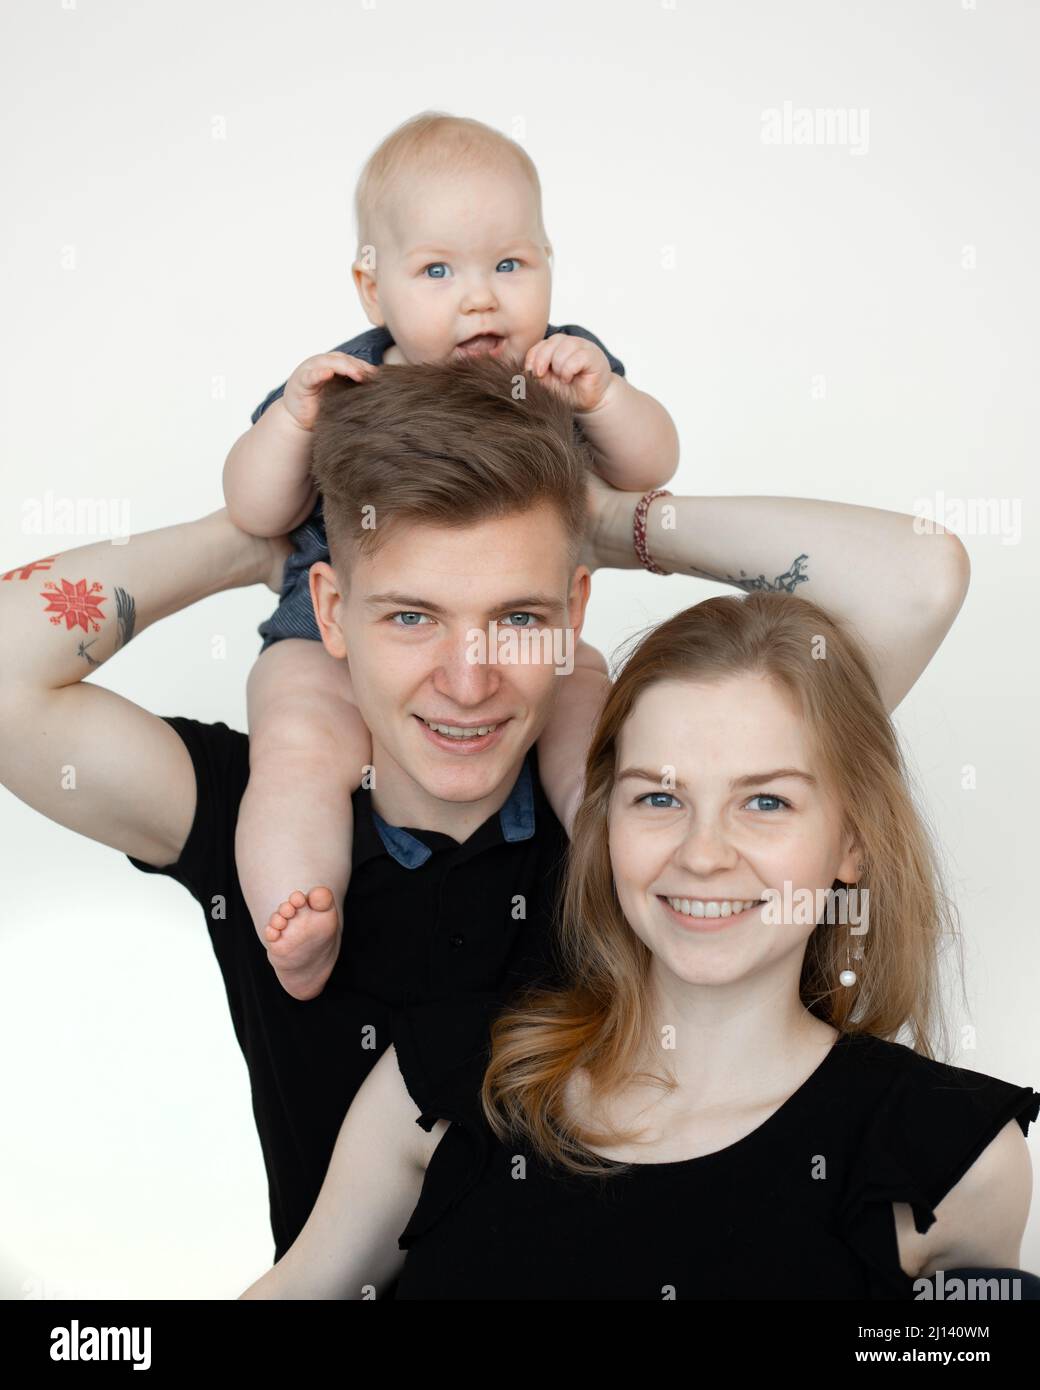 Vertical smiling family standing together in white studio, woman, man, baby in black clothes. Holding kid on shoulders Stock Photo